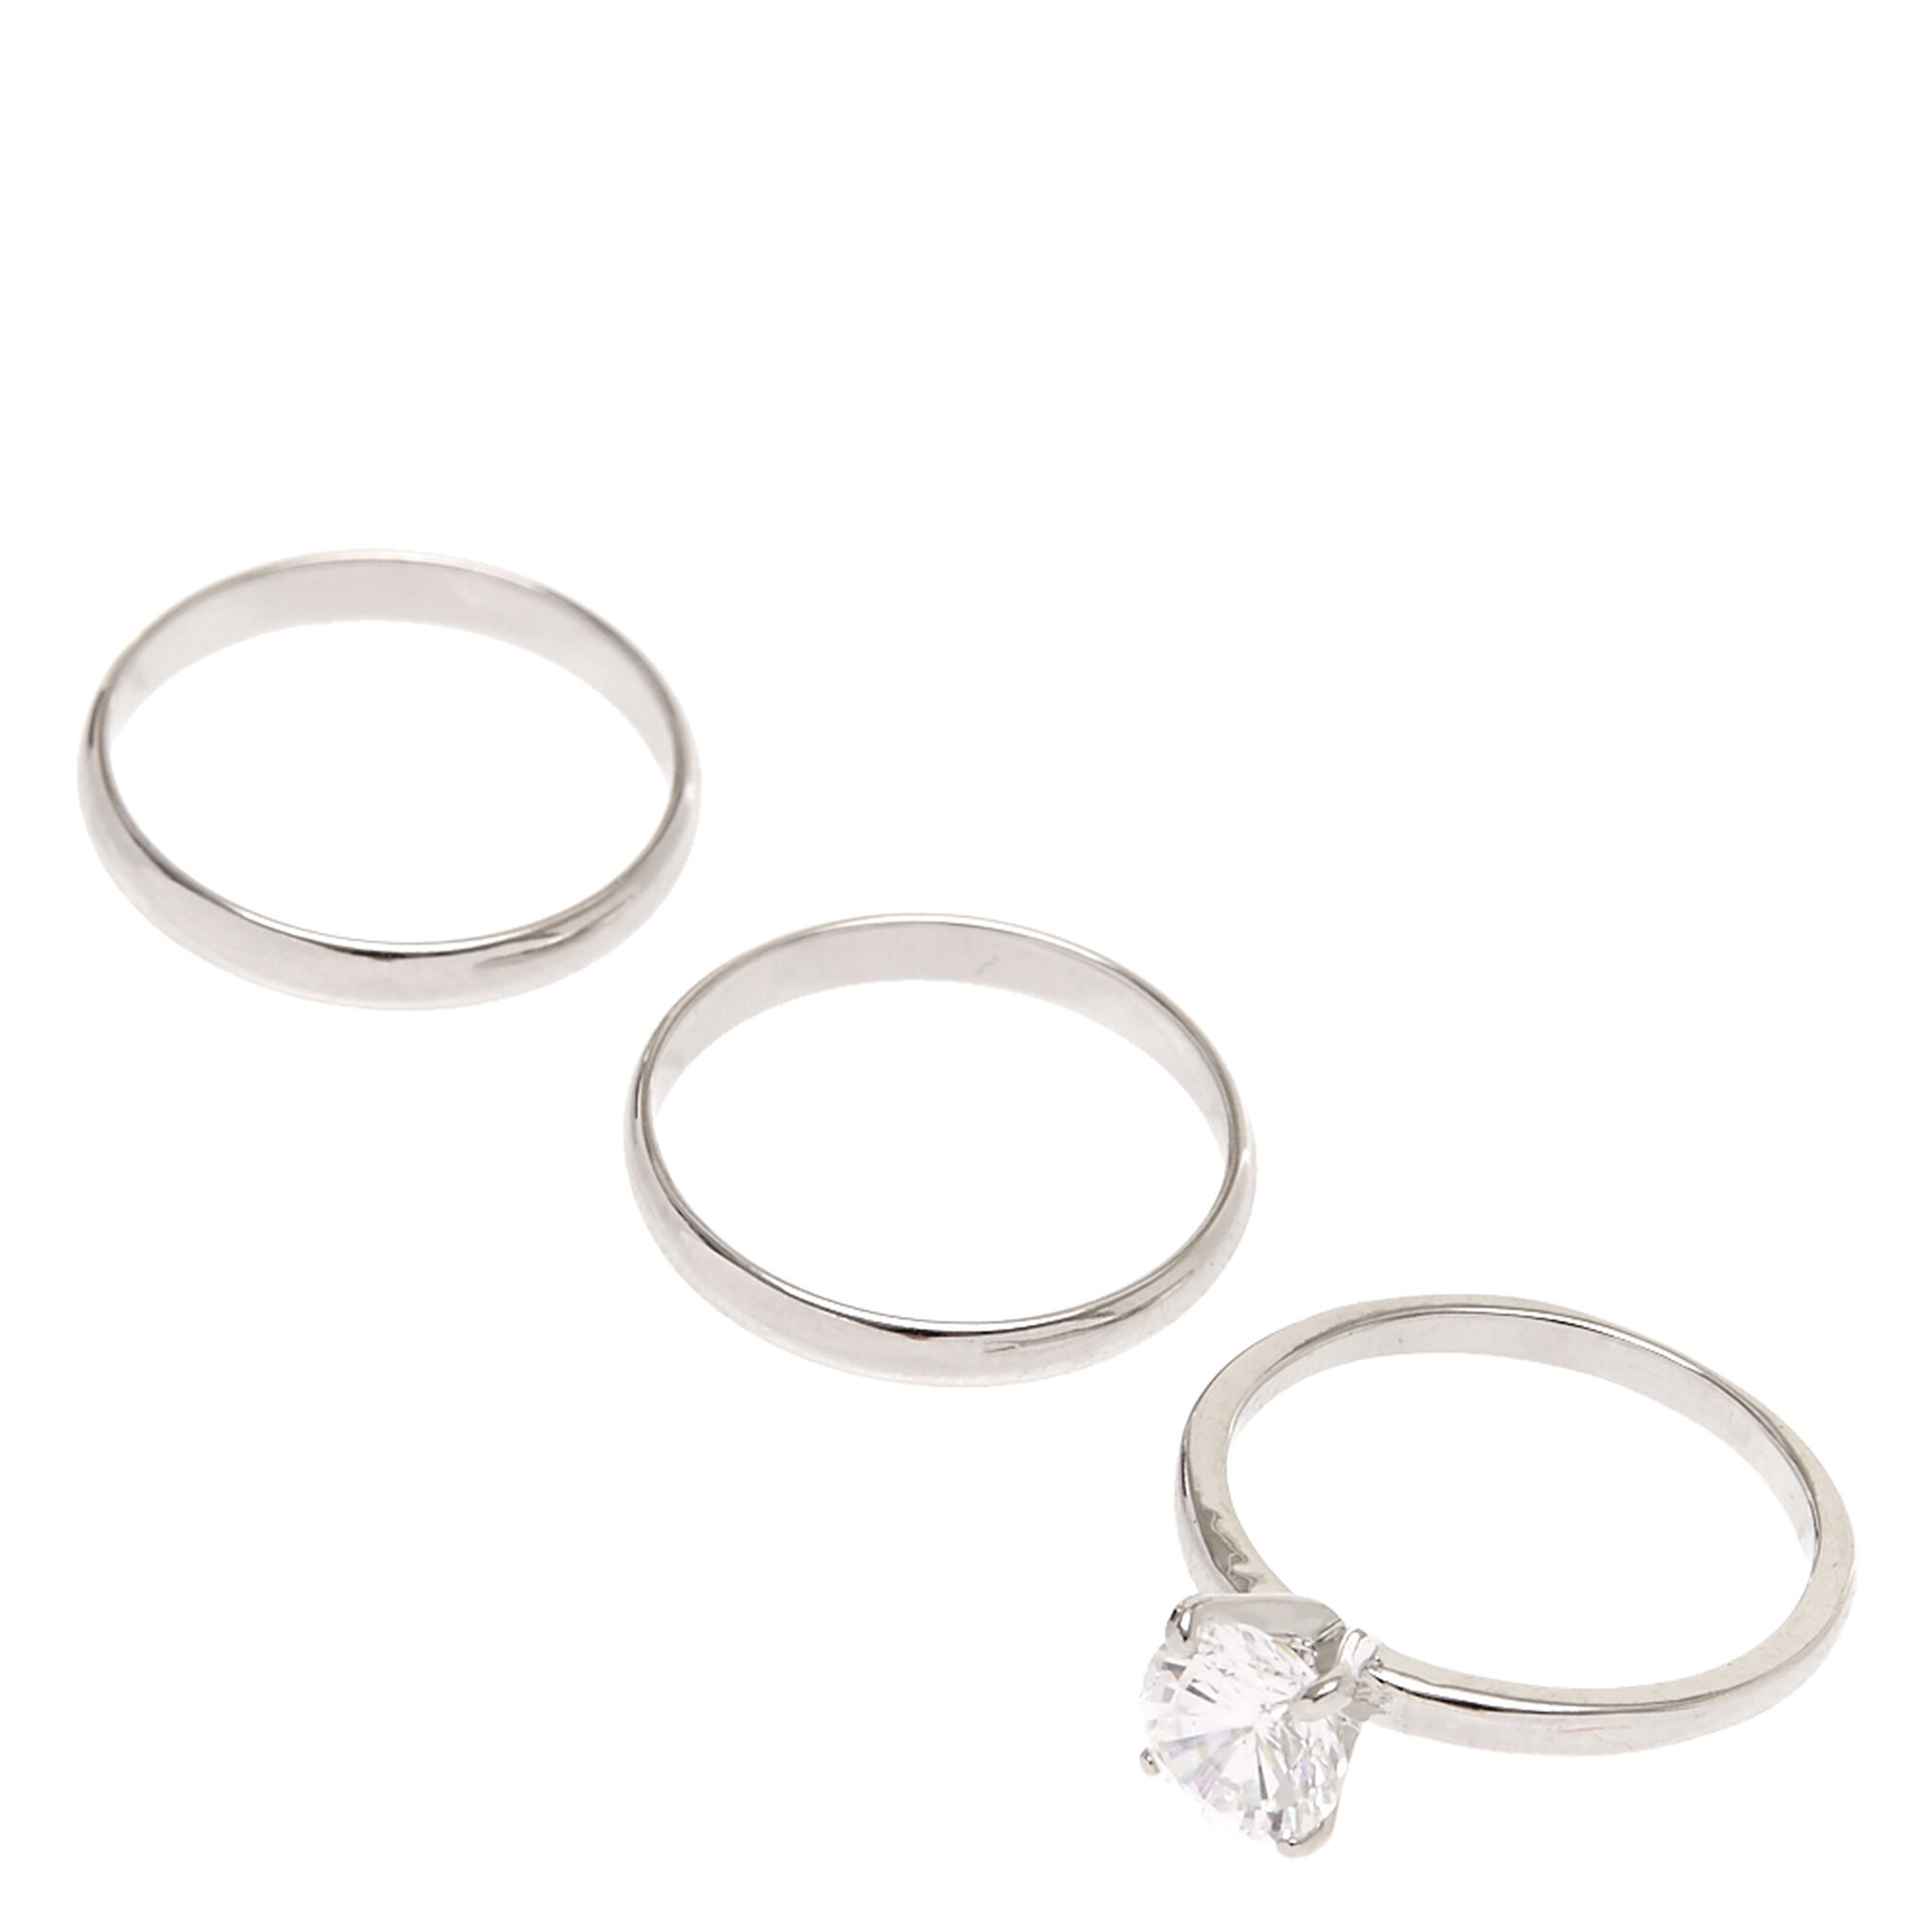 View Claires Classic Rings 3 Pack Silver information